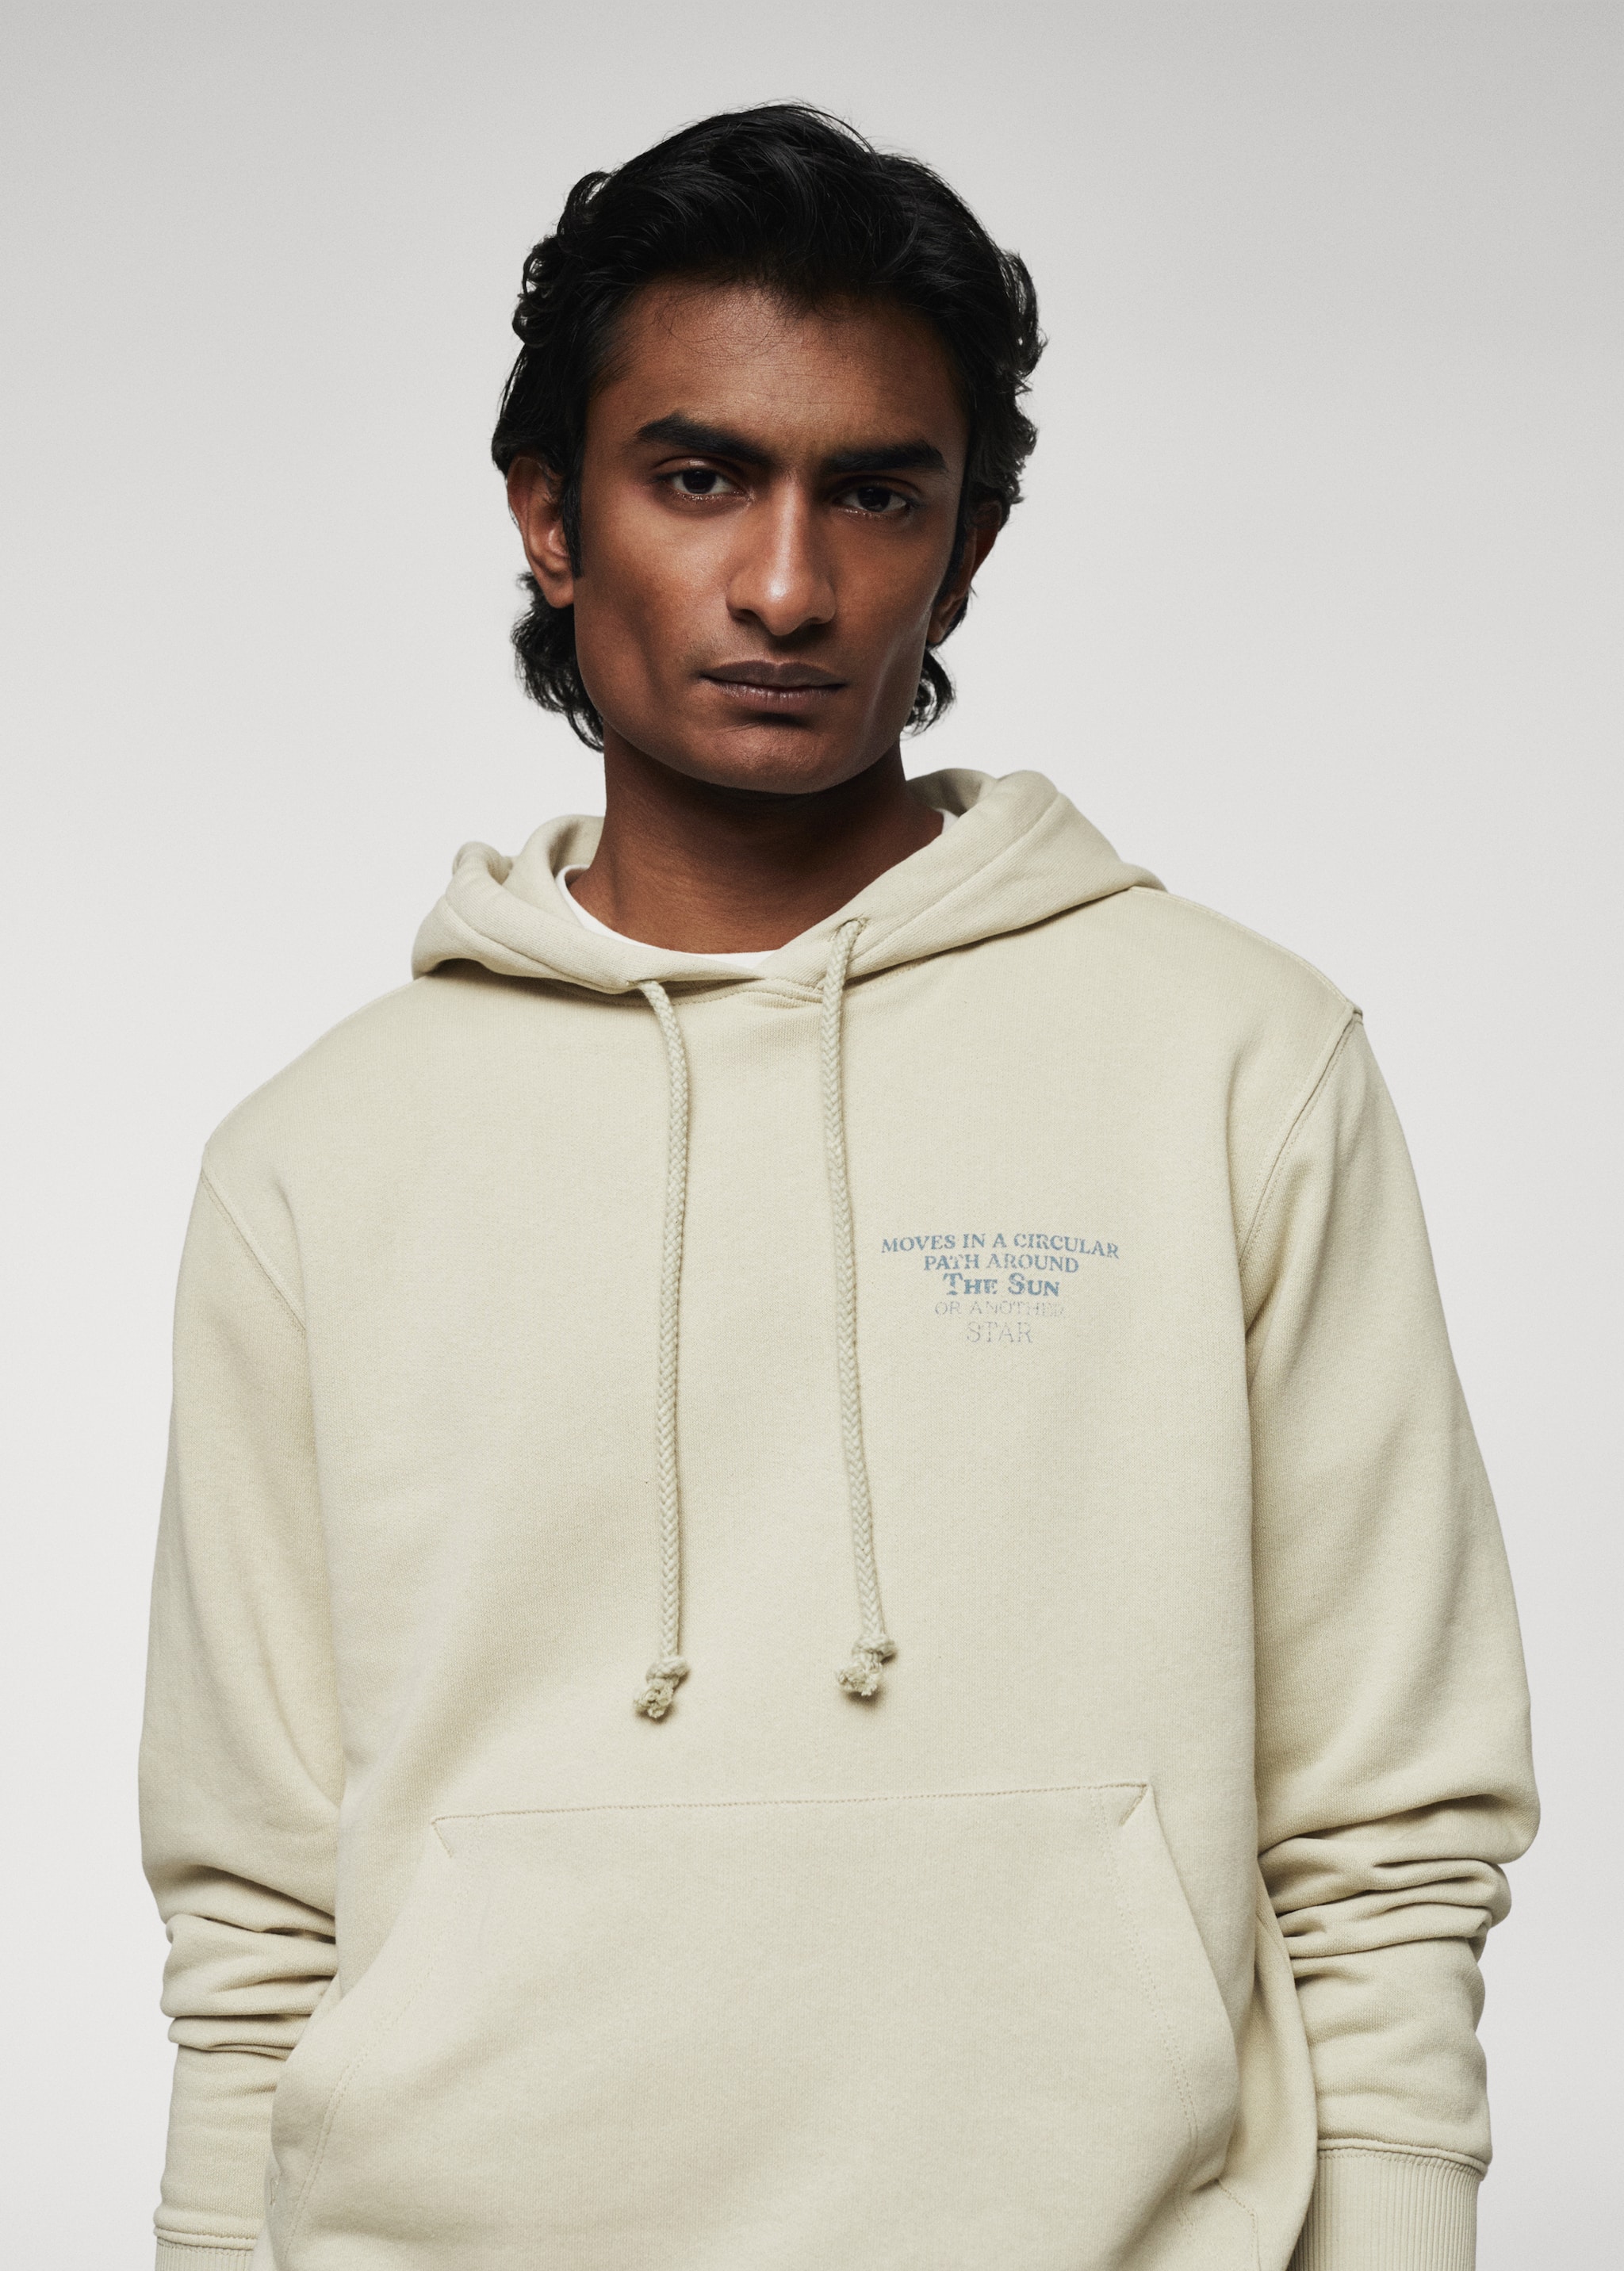 100% cotton hooded sweatshirt text - Details of the article 1